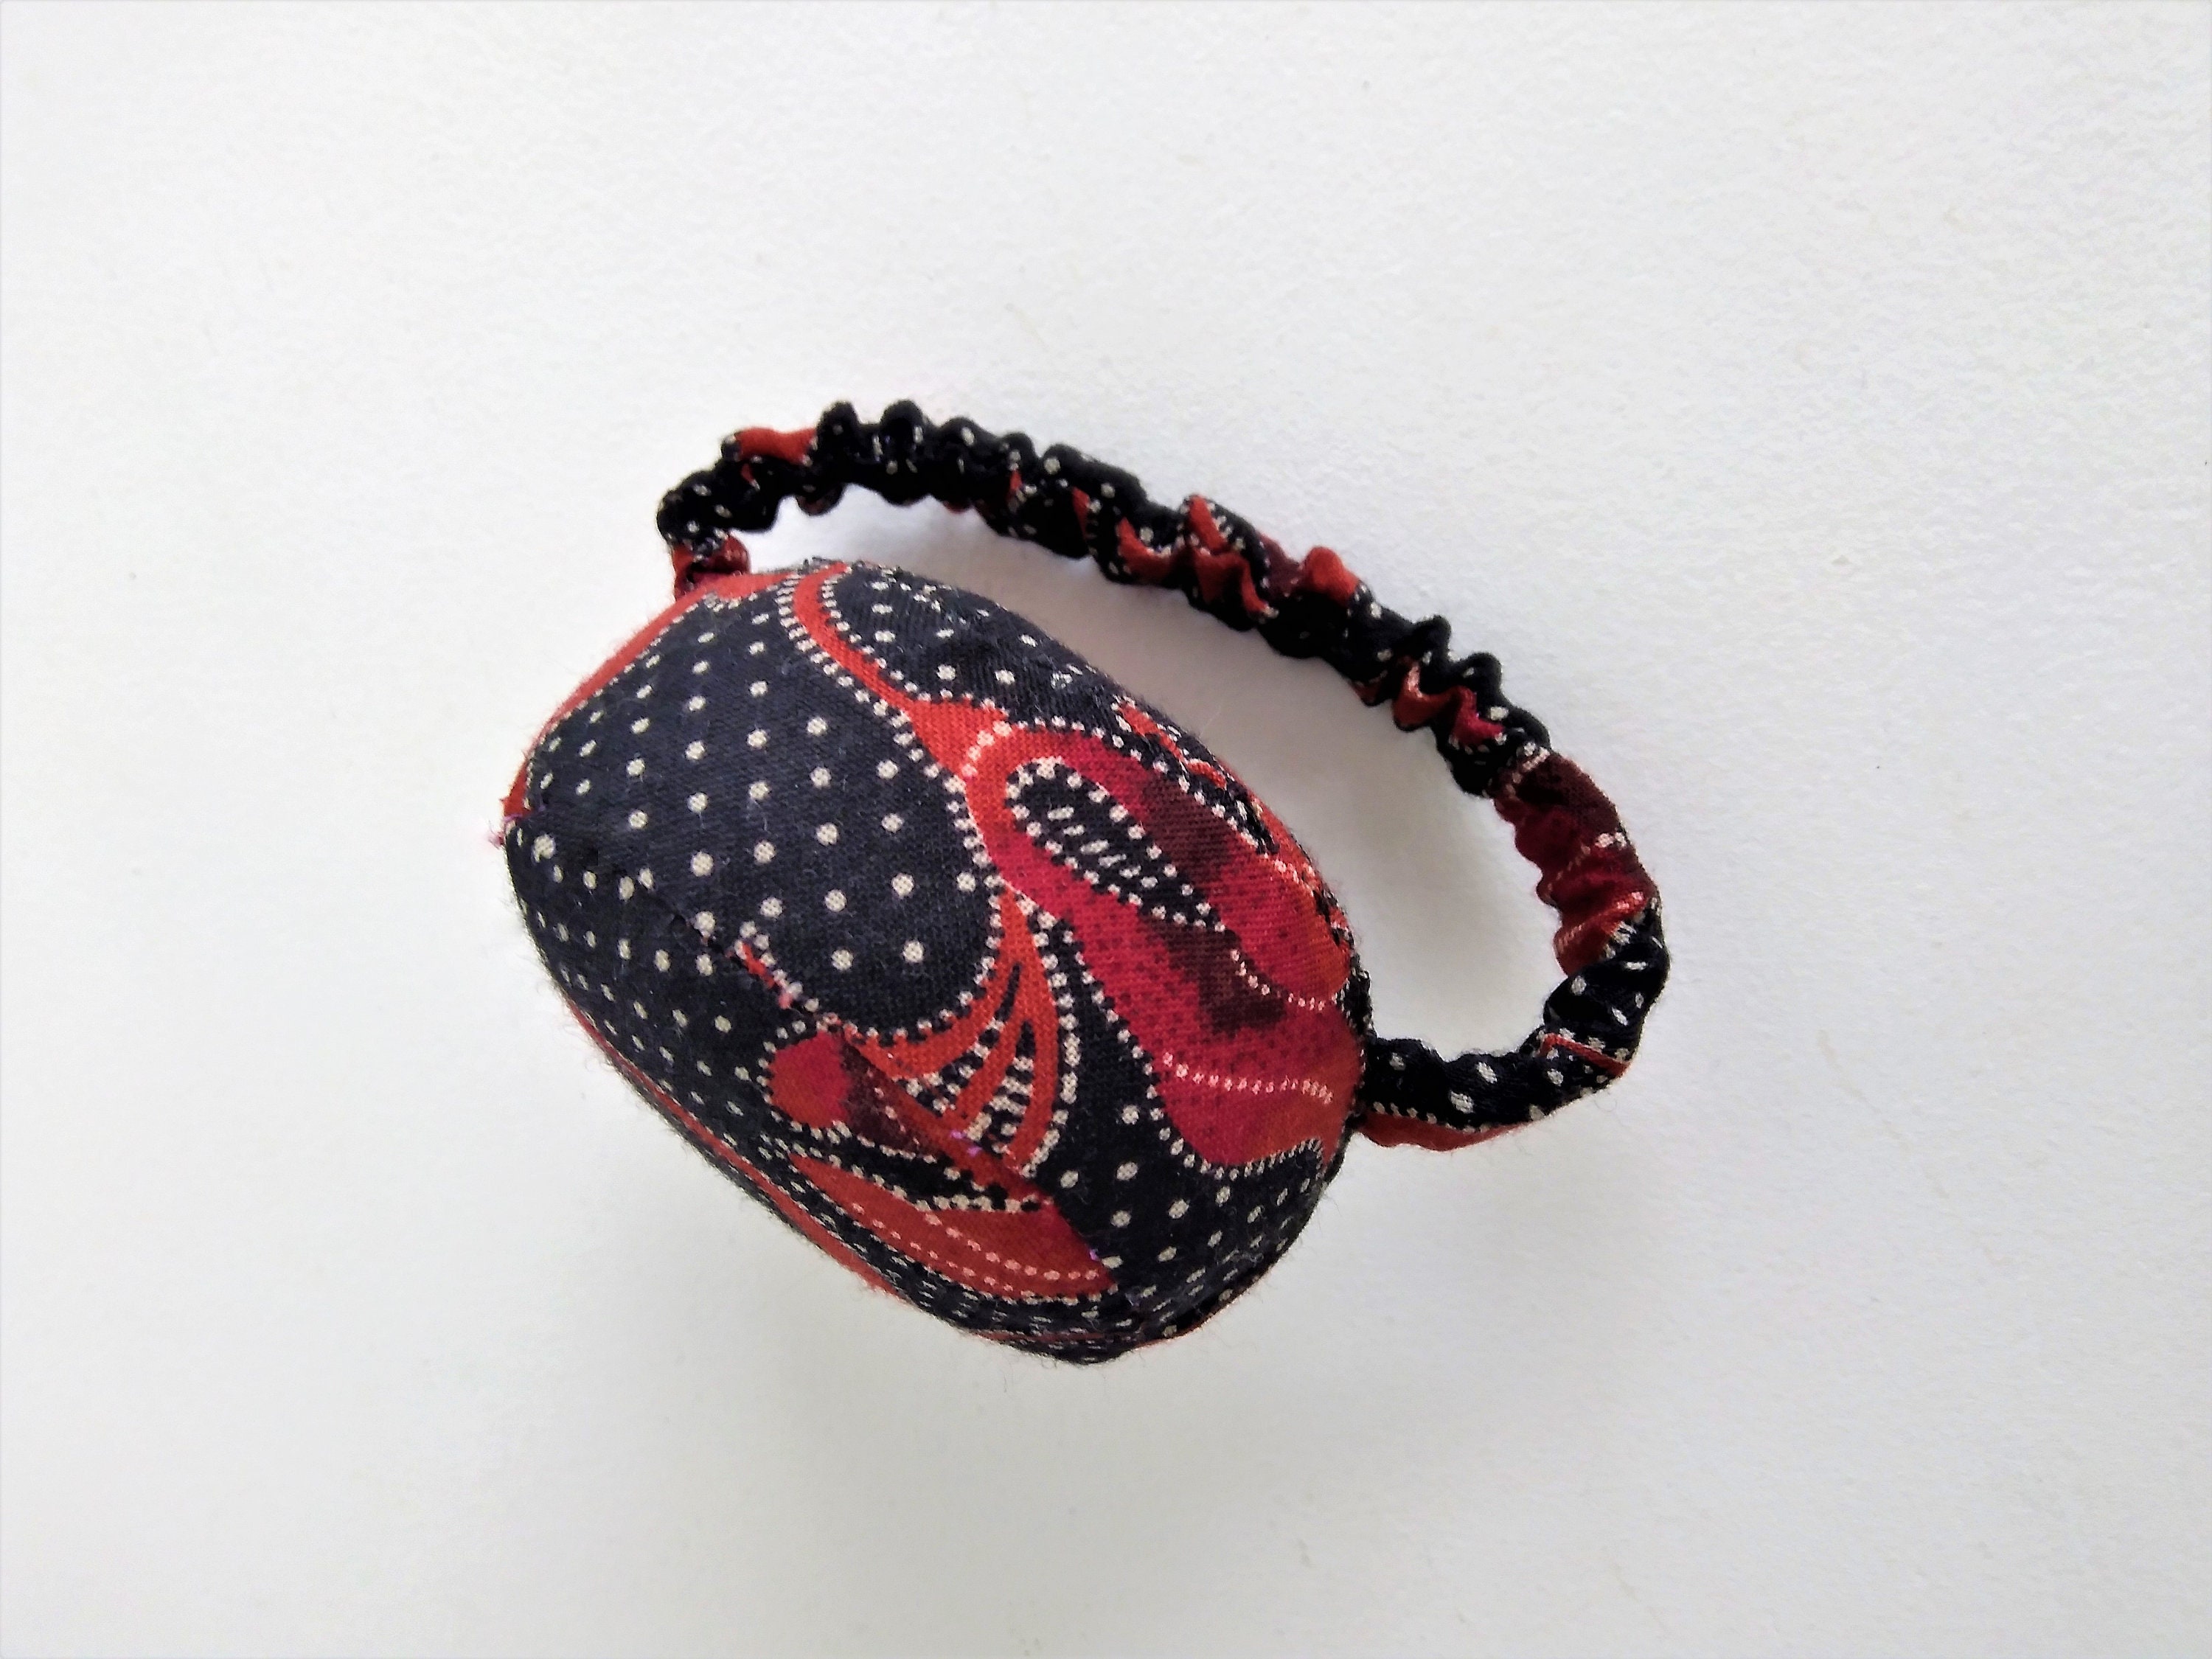 Wrist Pin Cushion : Sewing Parts Online